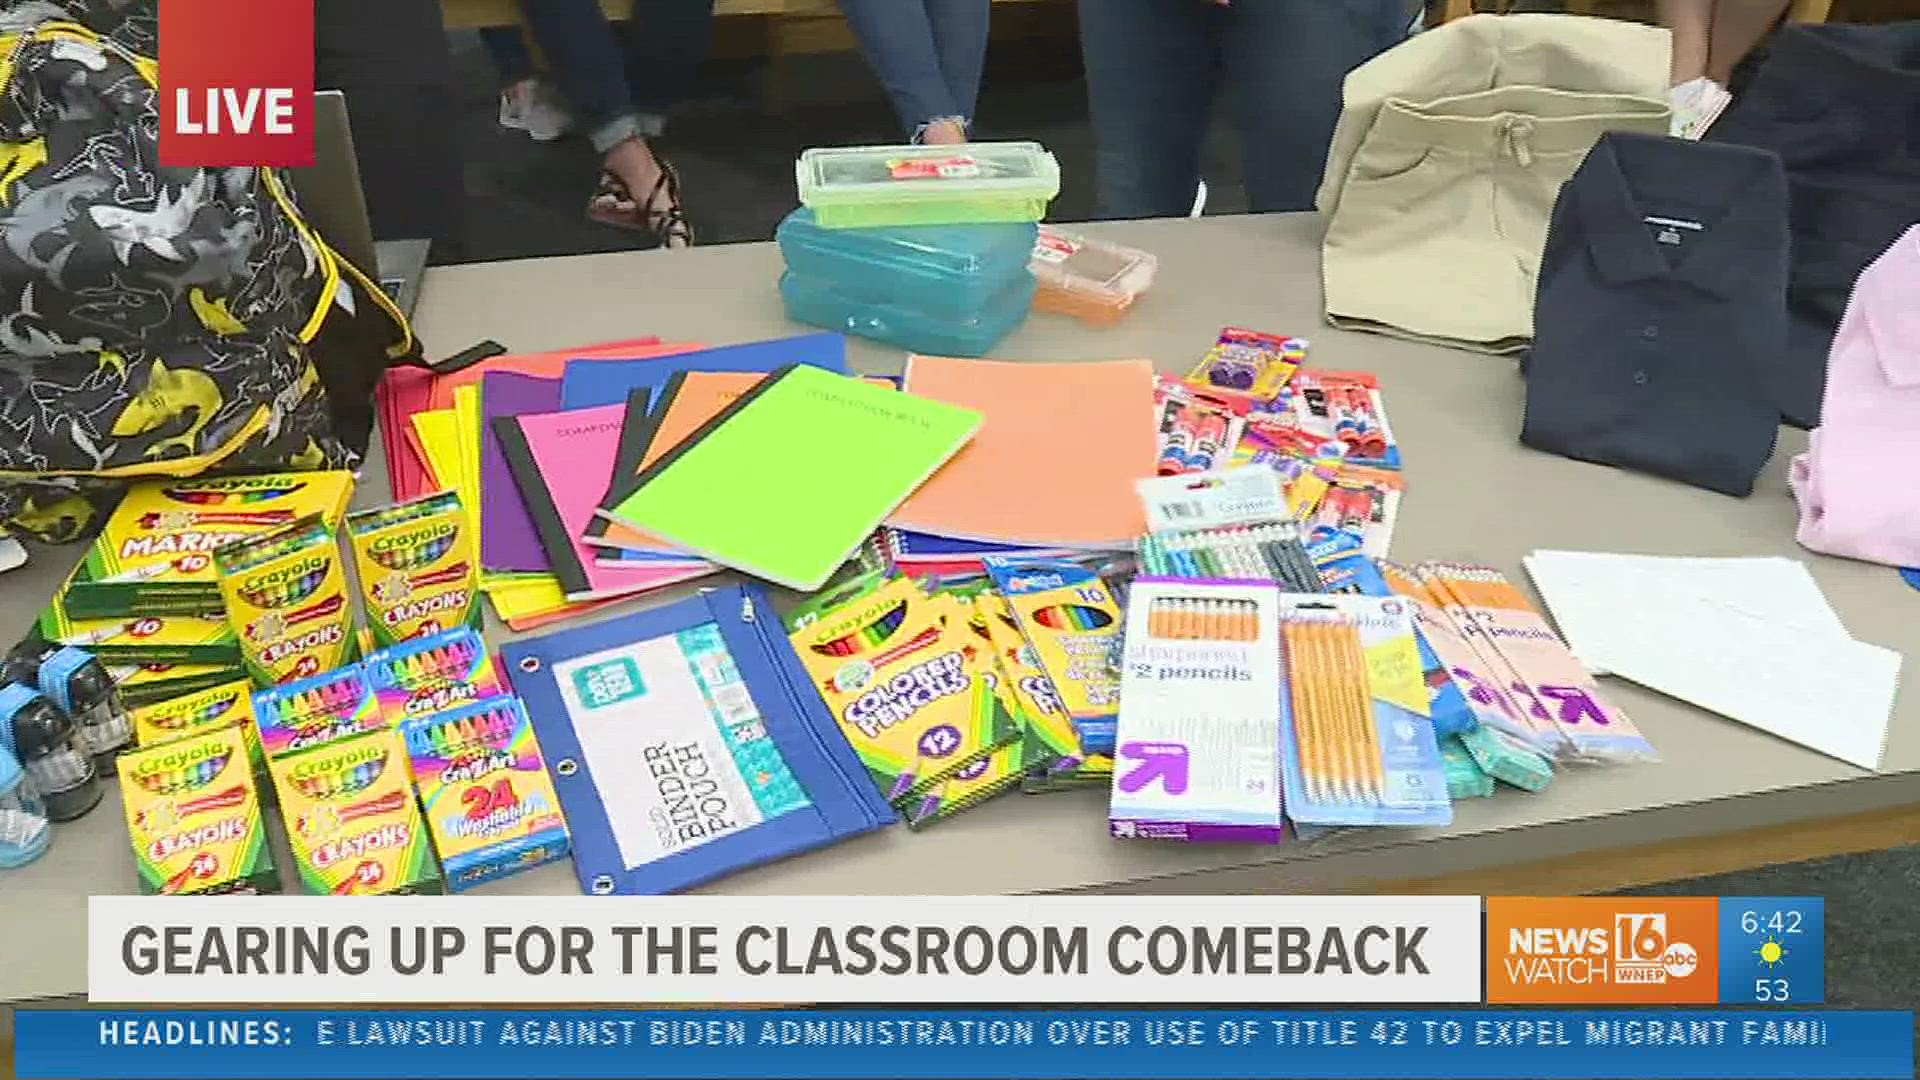 With August upon us, signs of "back to school" are just about everywhere. Newswatch 16's Ryan Leckey shared tips from local teachers on how to get ready for 2021.